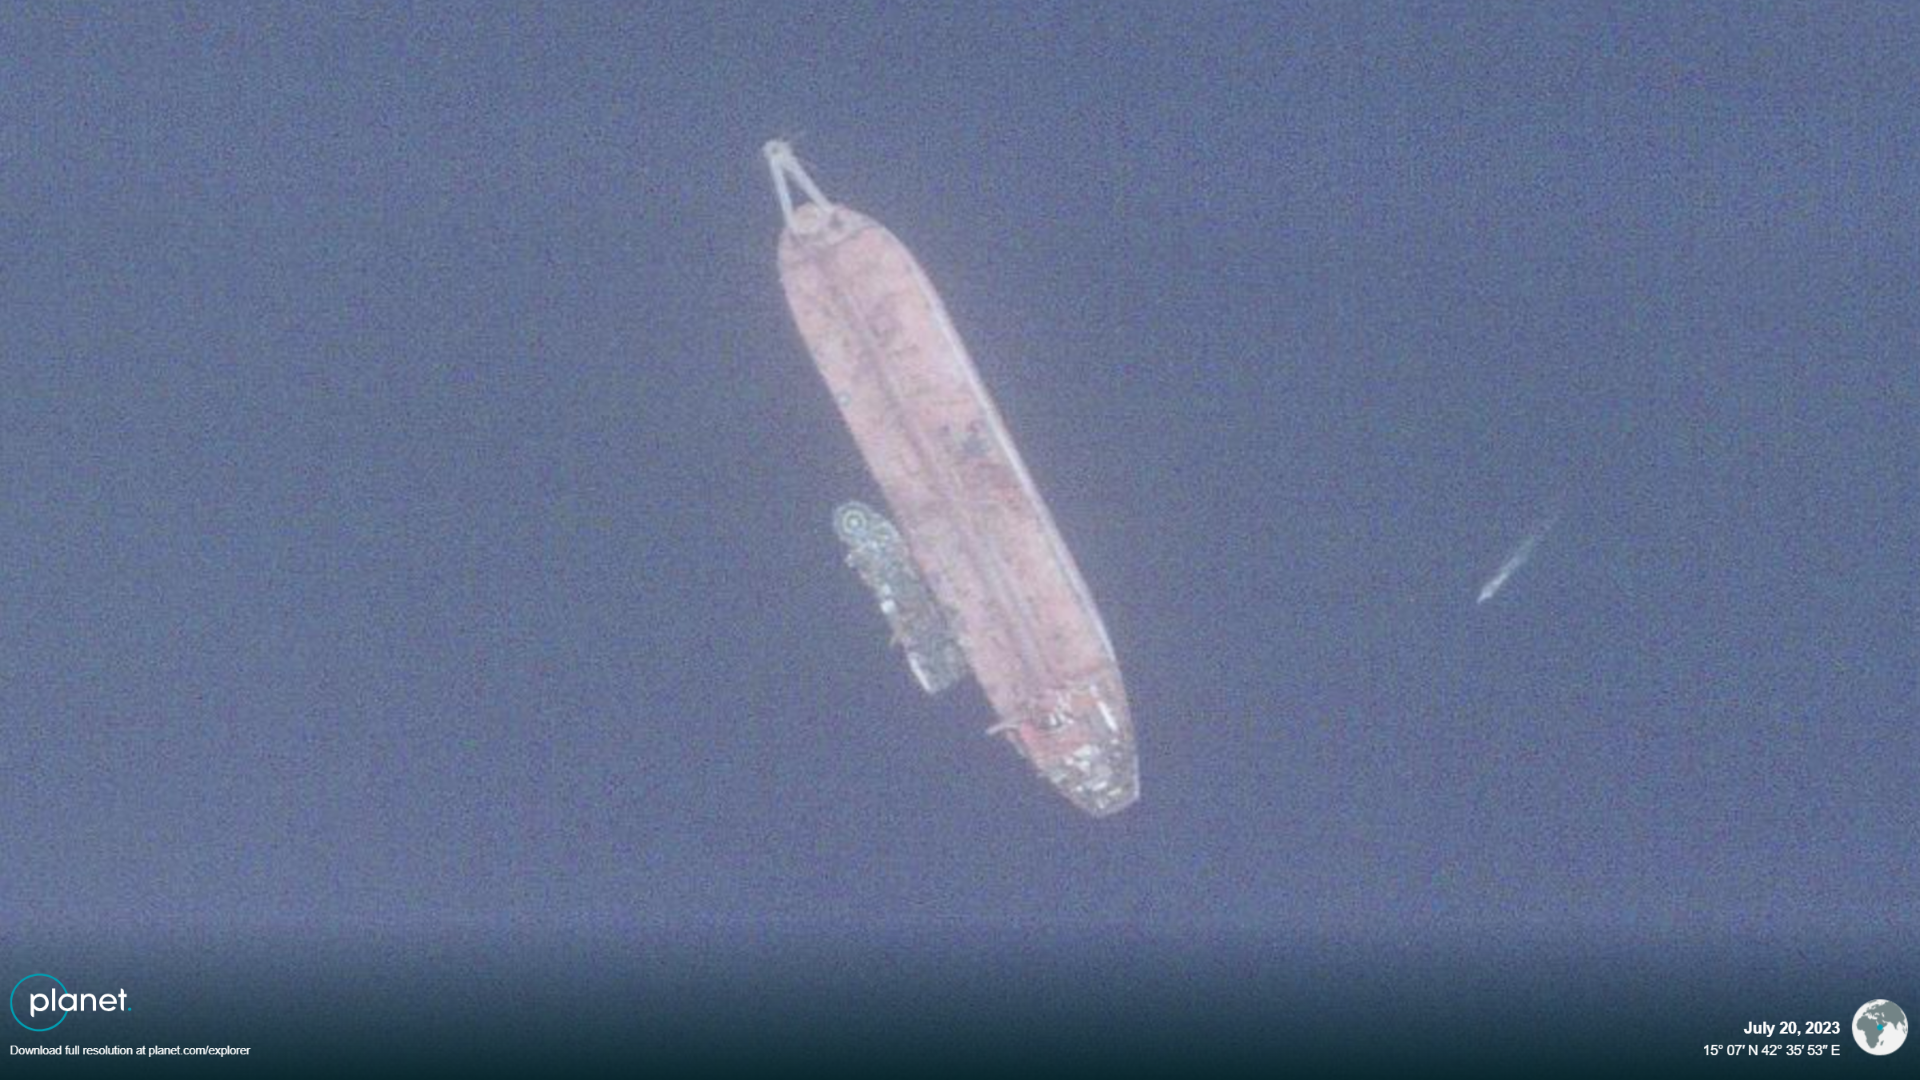 High resolution satellite picture of the FSO SAFER oil tanker next to one of the rescue vessels, the NDEAVOR 6.33am UTC. Amsterdam, Thursday July 20, 2022: The hazardous operation to remove more than a million barrels of oil from the decaying FSO SAFER supertanker off Yemen’s coast has commenced after years of delay. The replacement oil tanker Nautica, now renamed YEMEN, getting close to the SAFER to start the United Nations-coordinated operation that should bring to an end to the almost decade long saga triggered by the outbreak of war in Yemen.